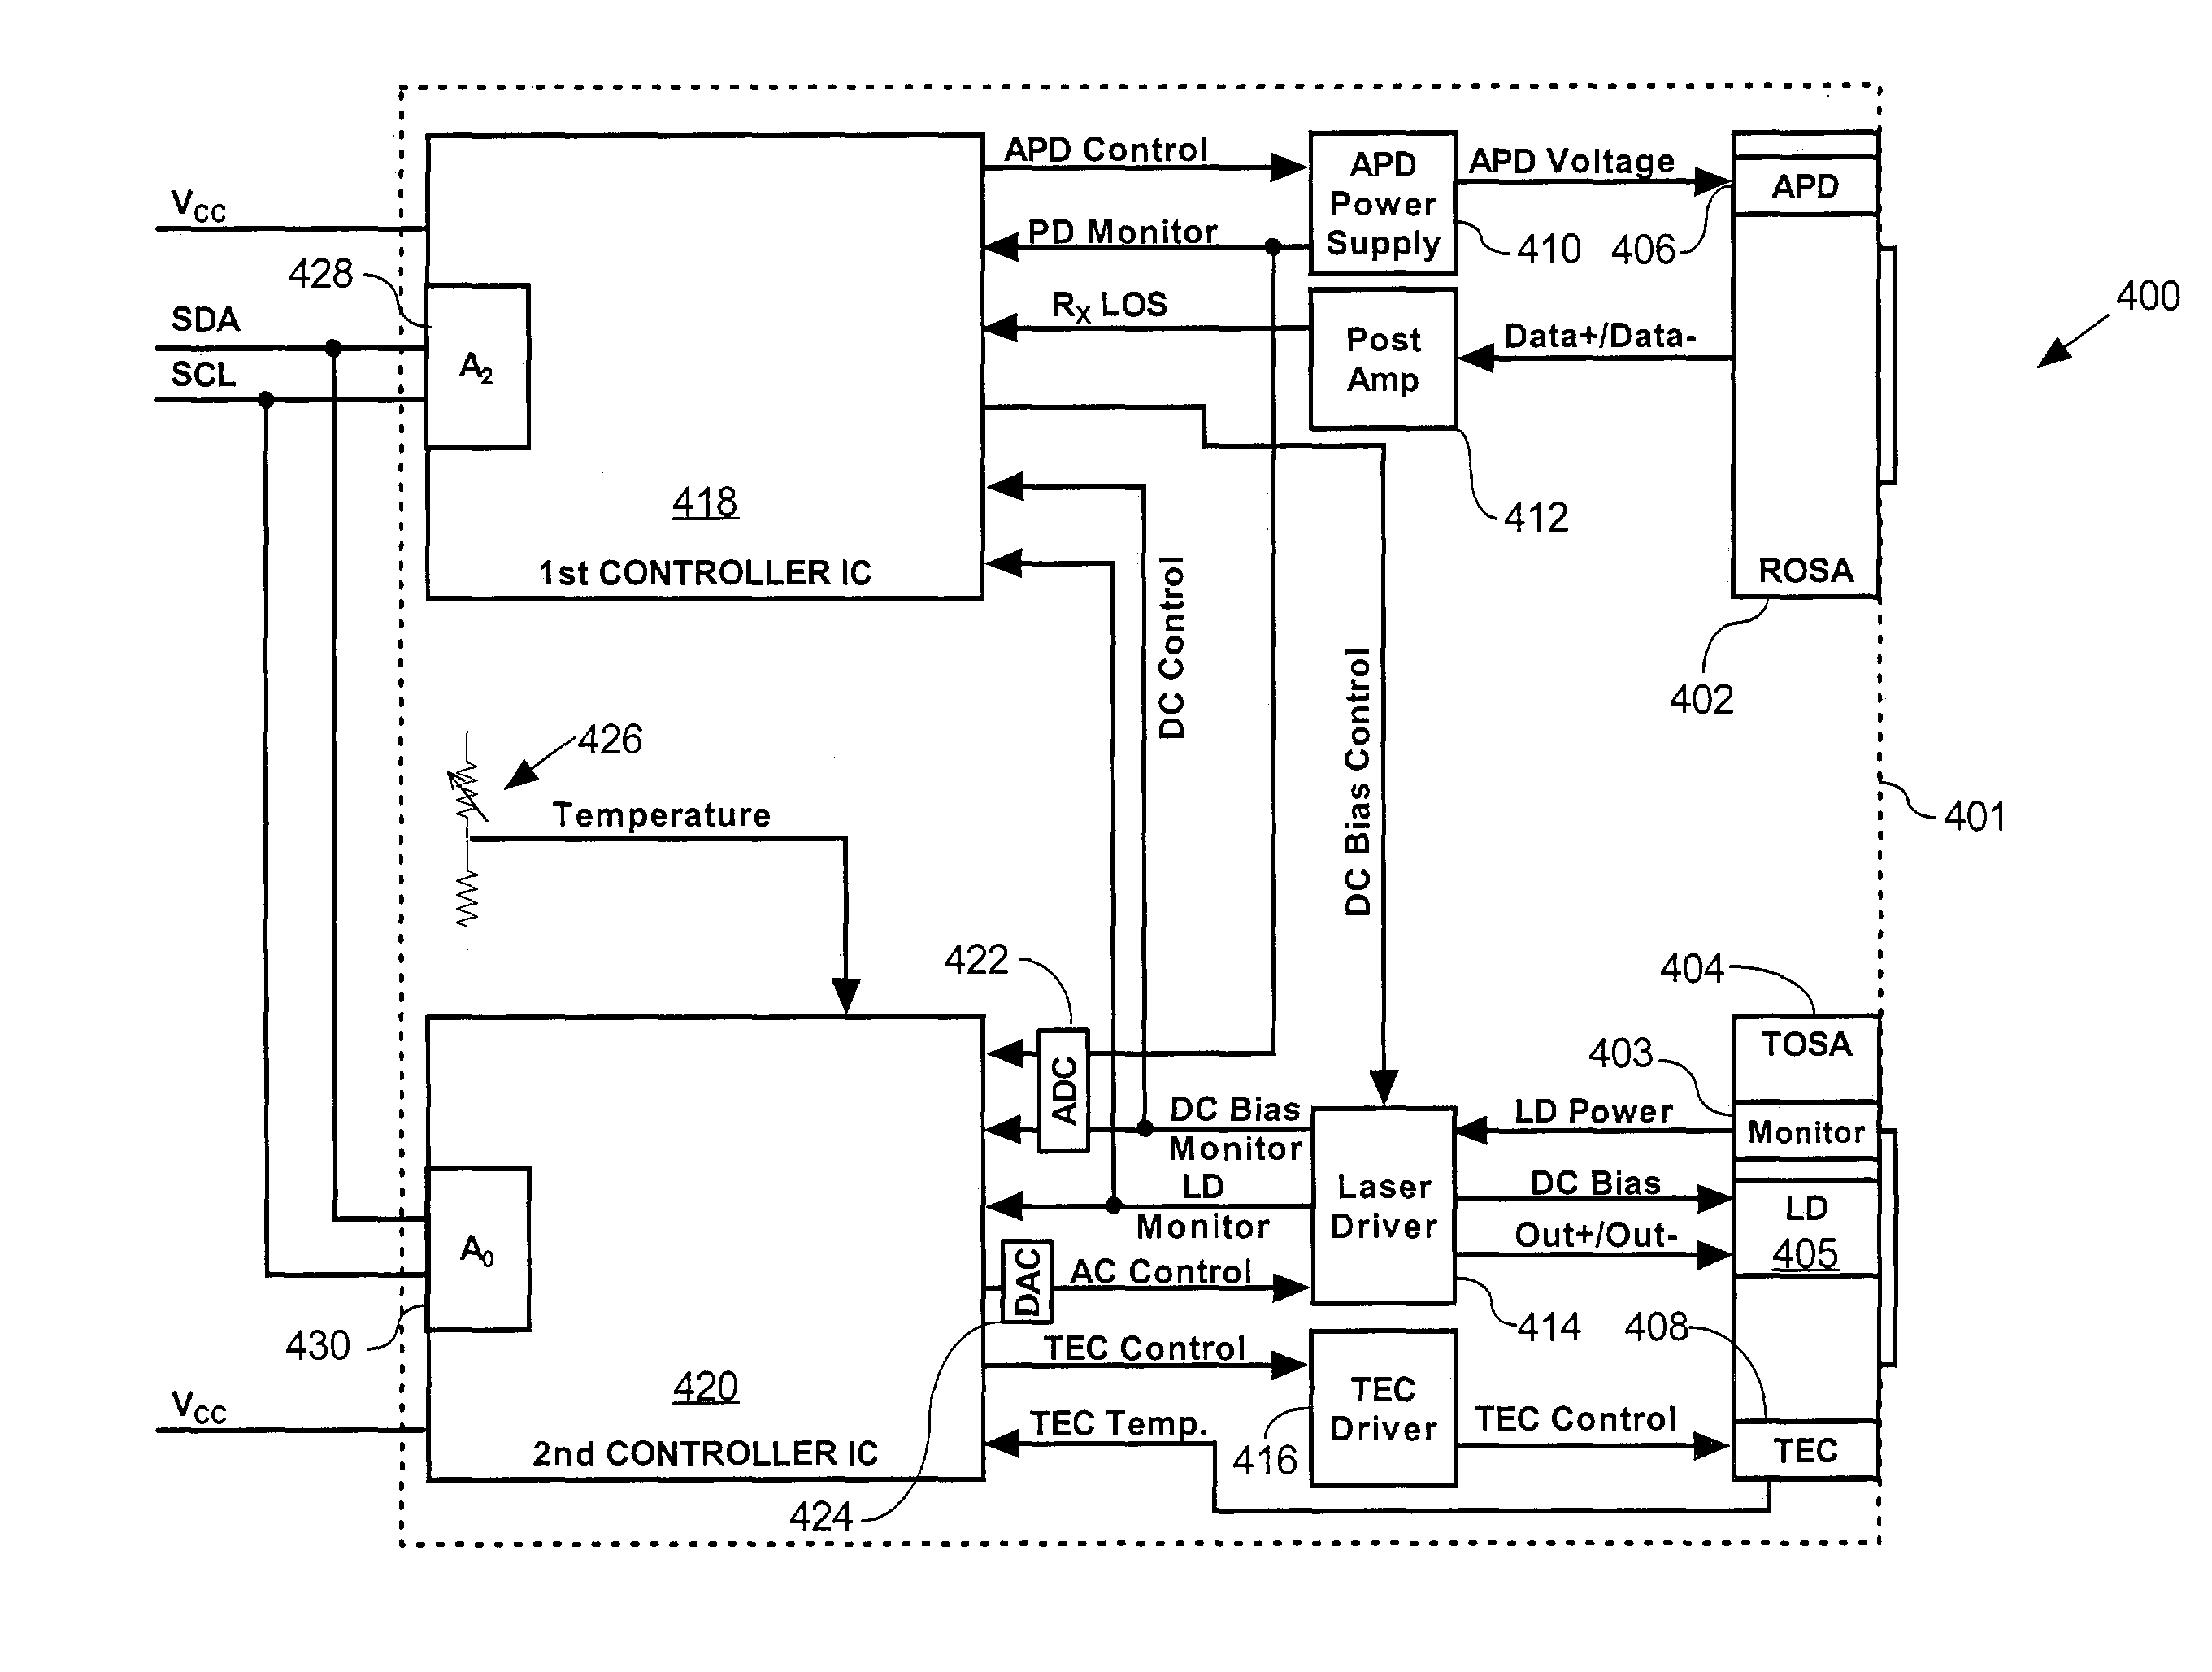 Optoelectronic transceiver having dual access to onboard diagnostics